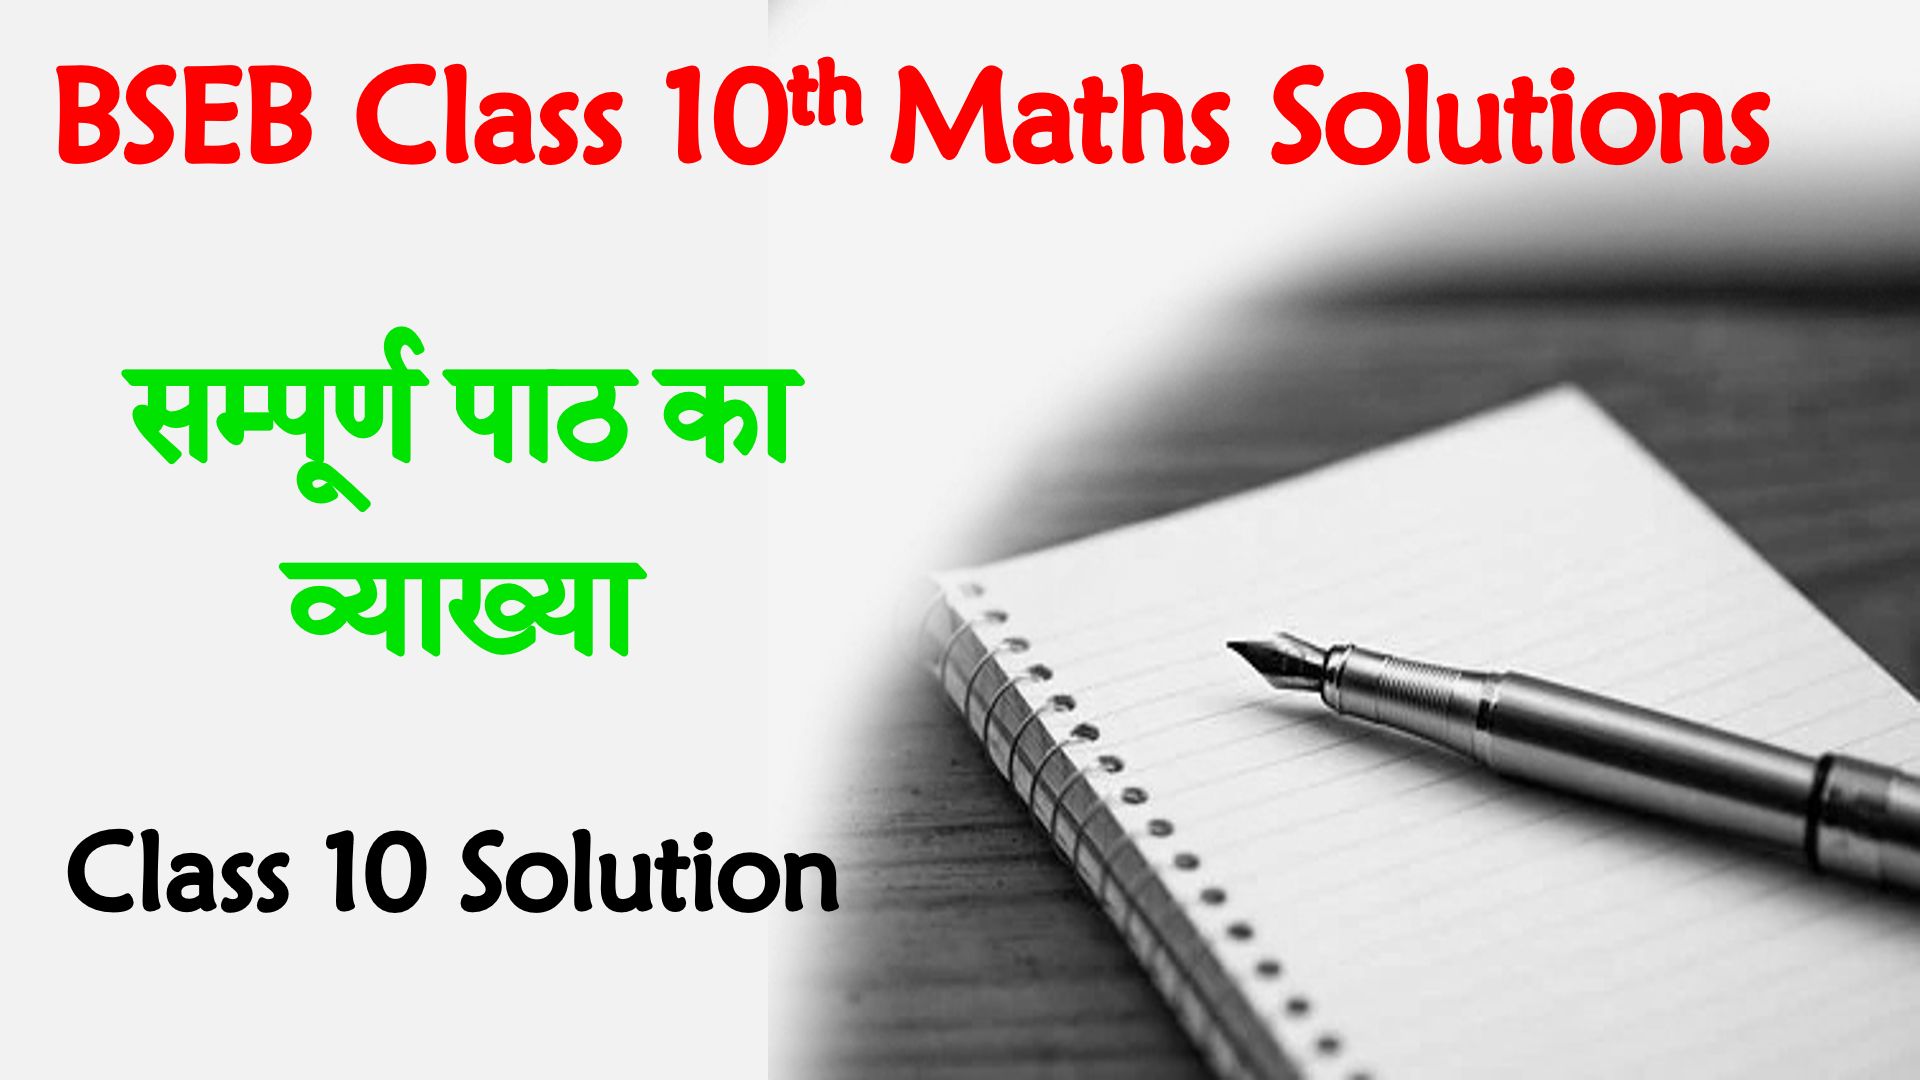 NCERT Text Book Solutions Notes for Class 10th